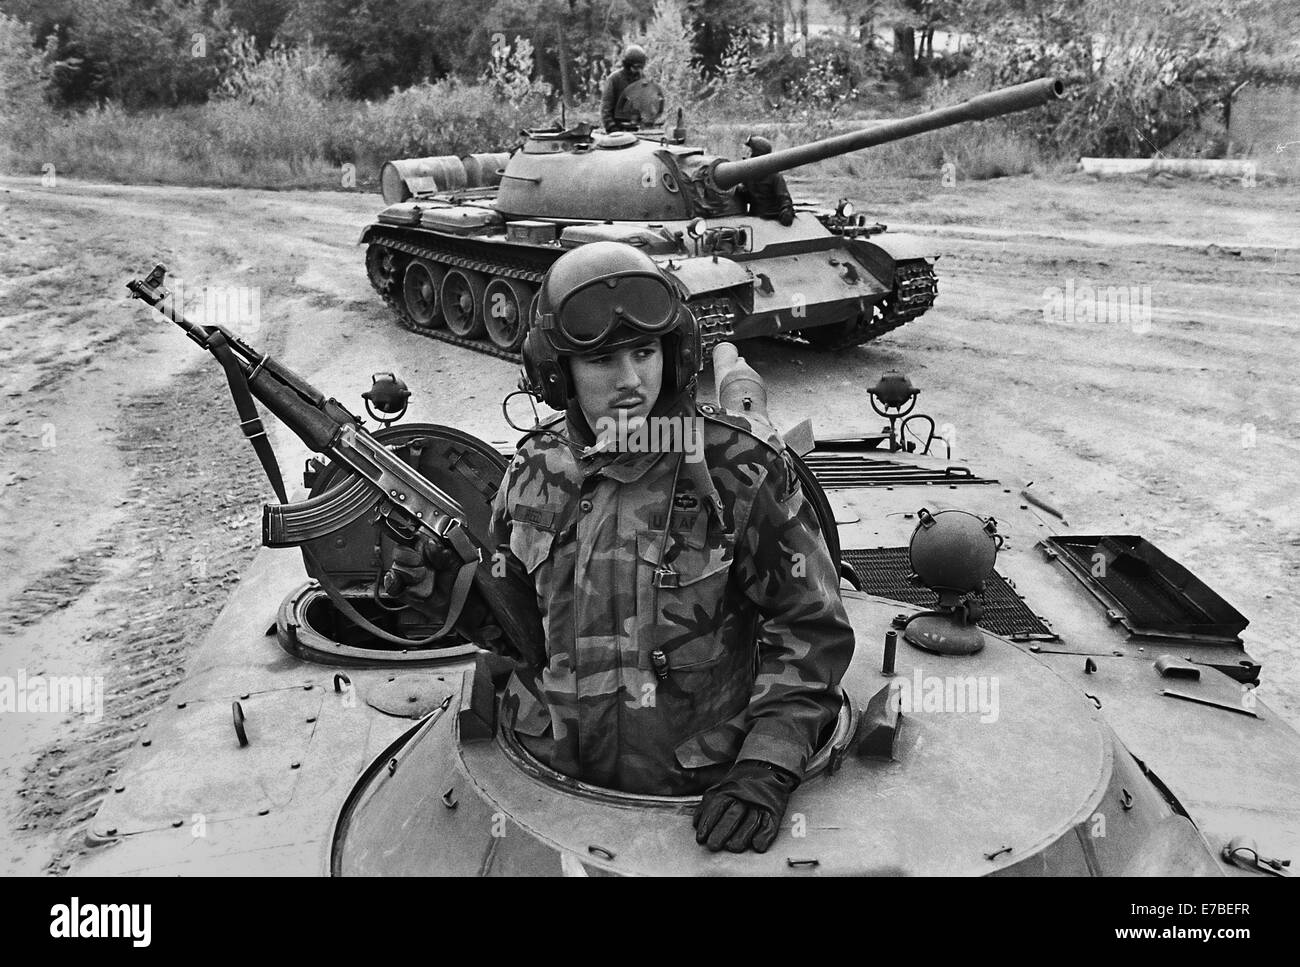 U.S.Army in Germany, Foreign Materials Training Detachment (FMTD) at Grafenwoehr training area, T 55 Soviet tank Stock Photo